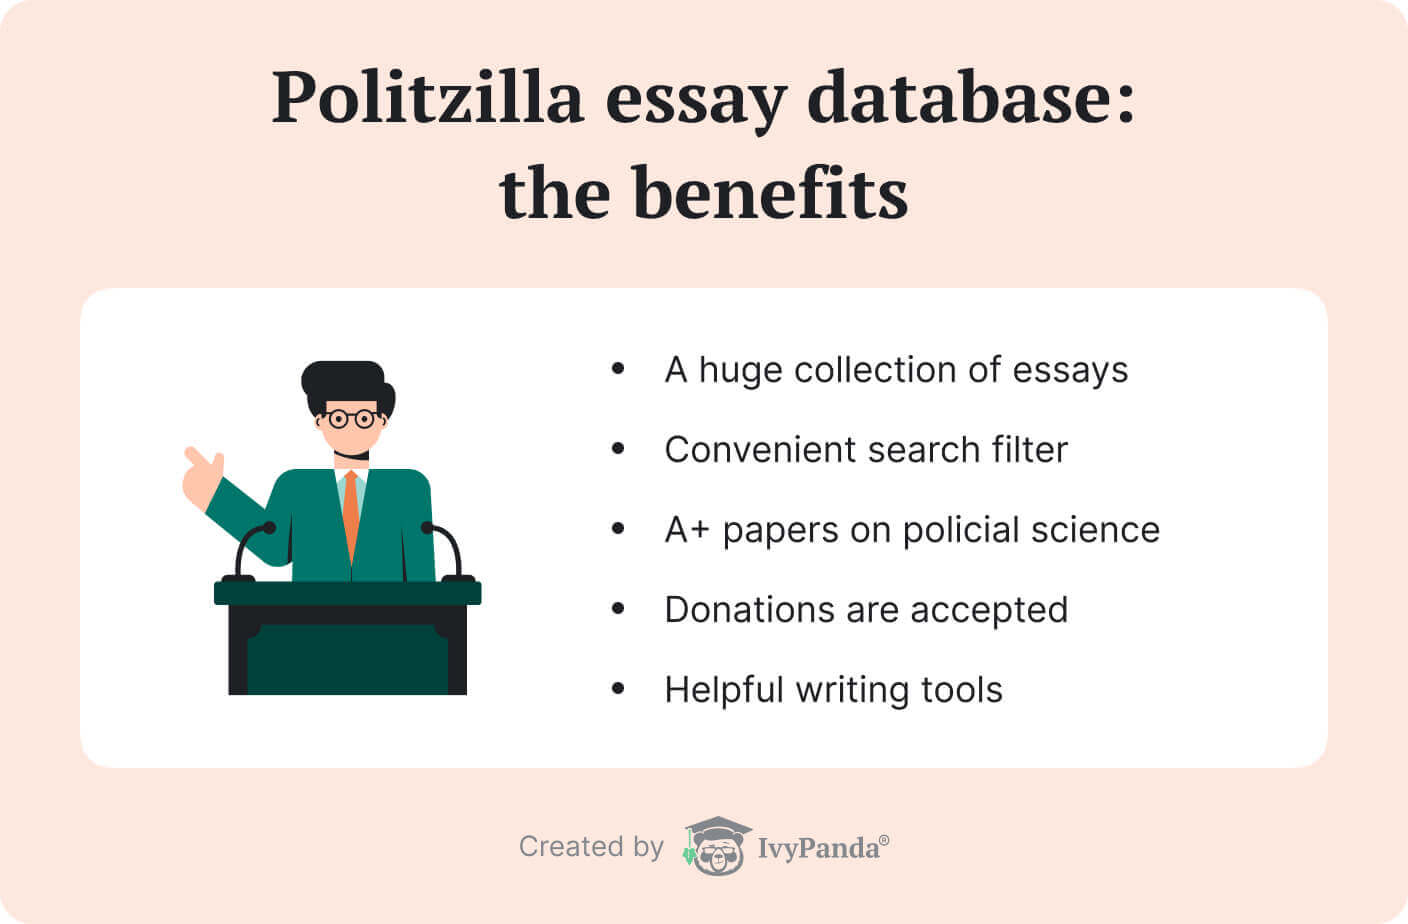 The picture lists the benefits of Politzilla essay database.